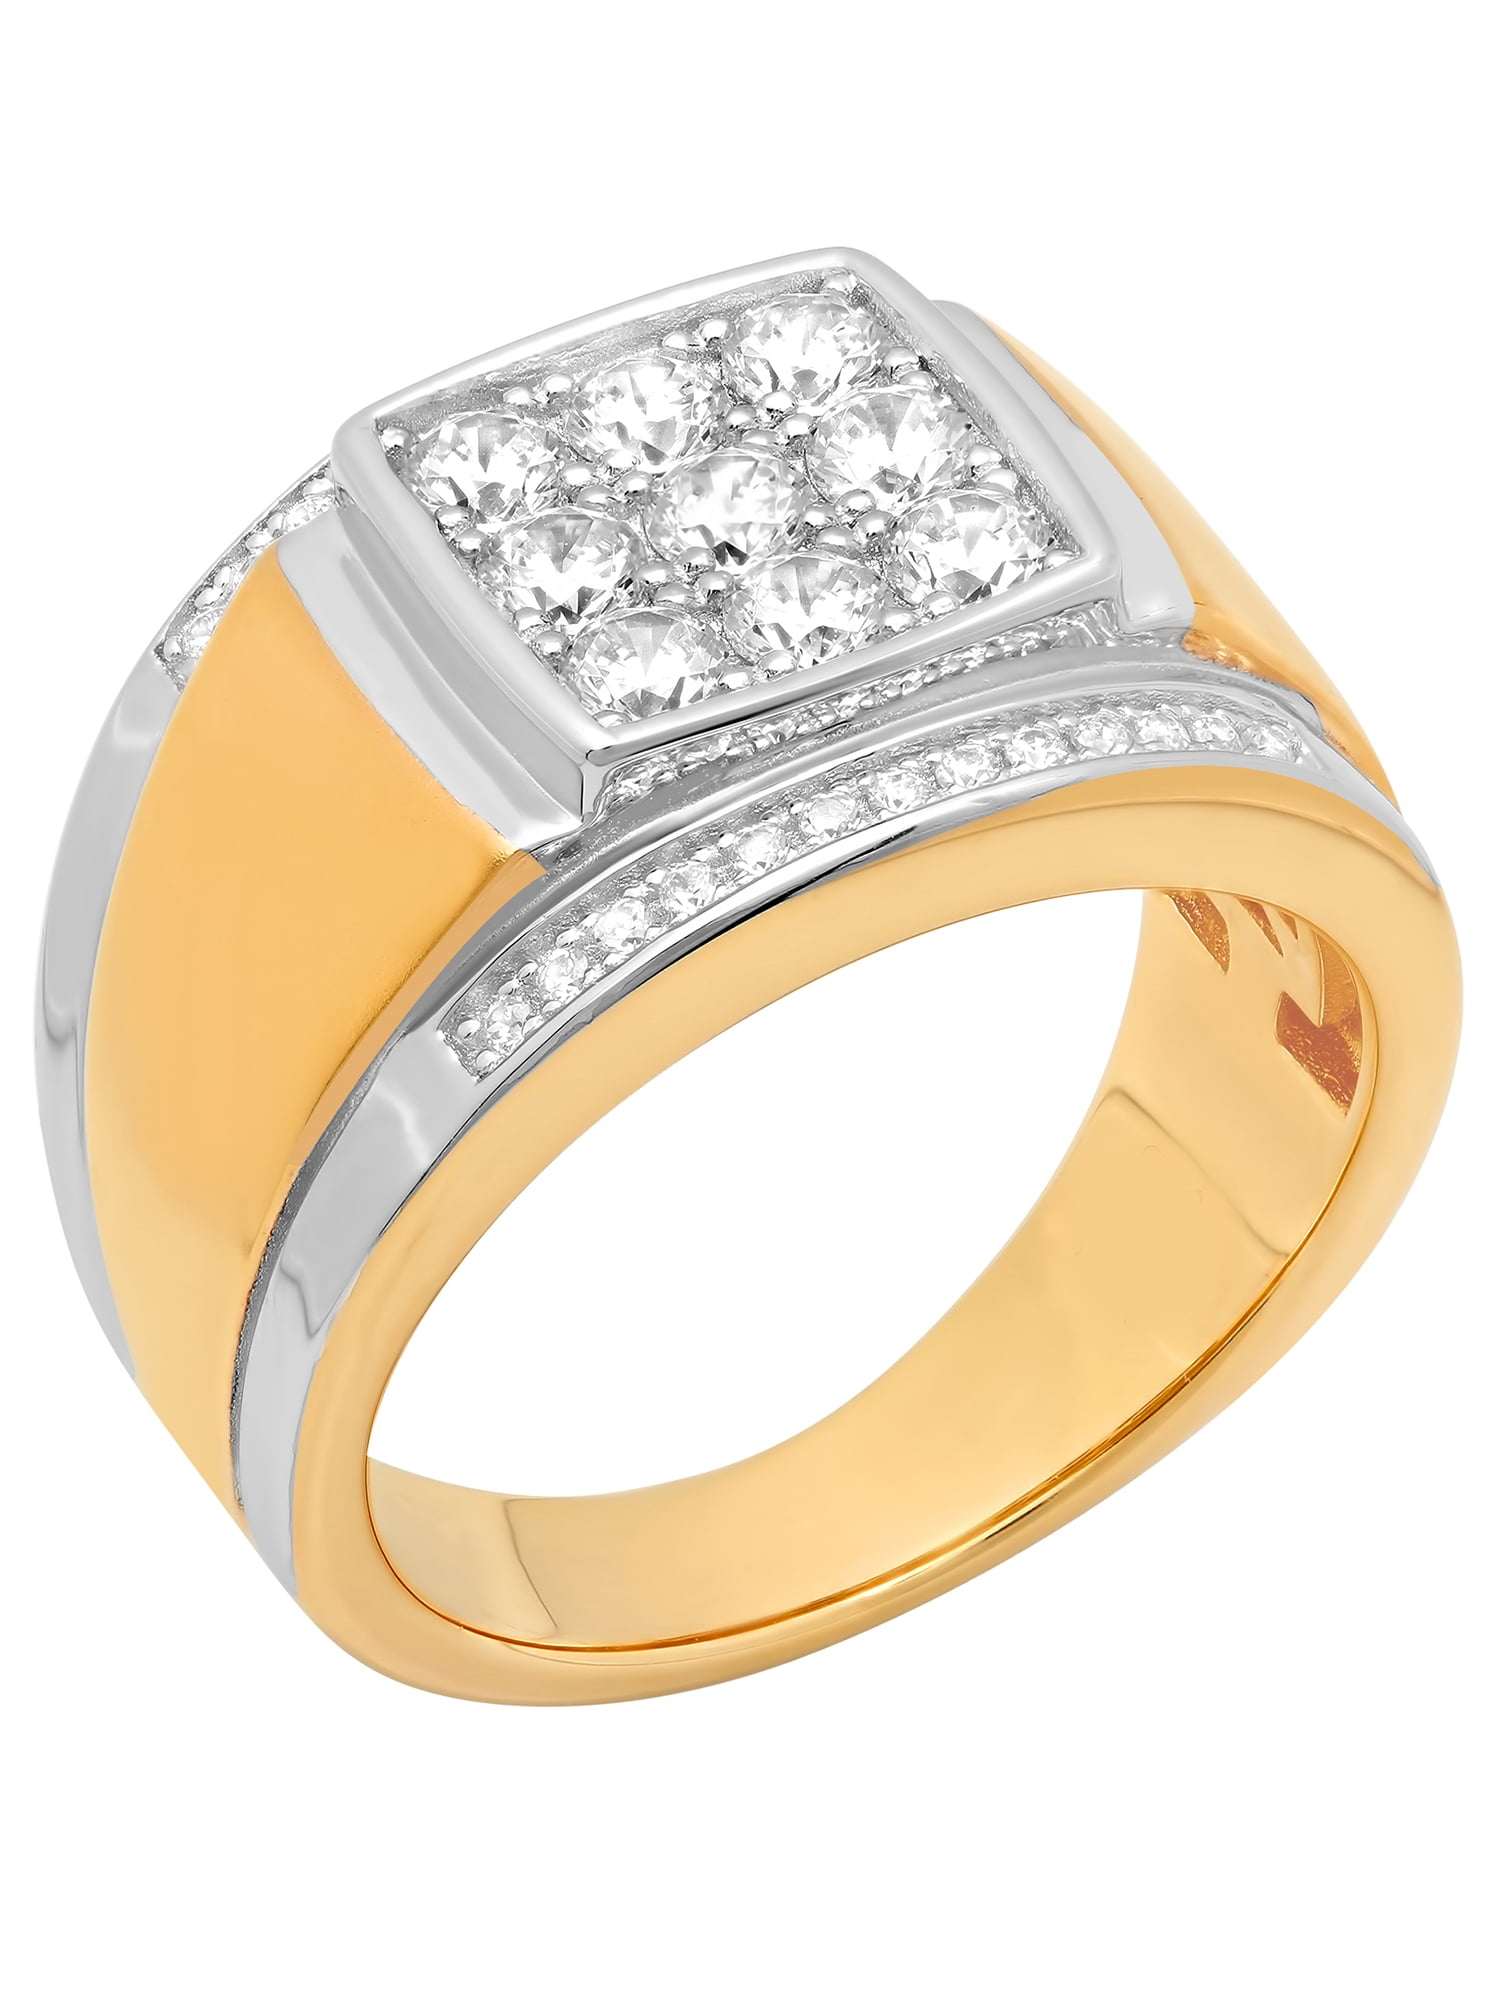 1 Pc White Cubic Zircon CZ Two Finger Gold Plated Women Ring